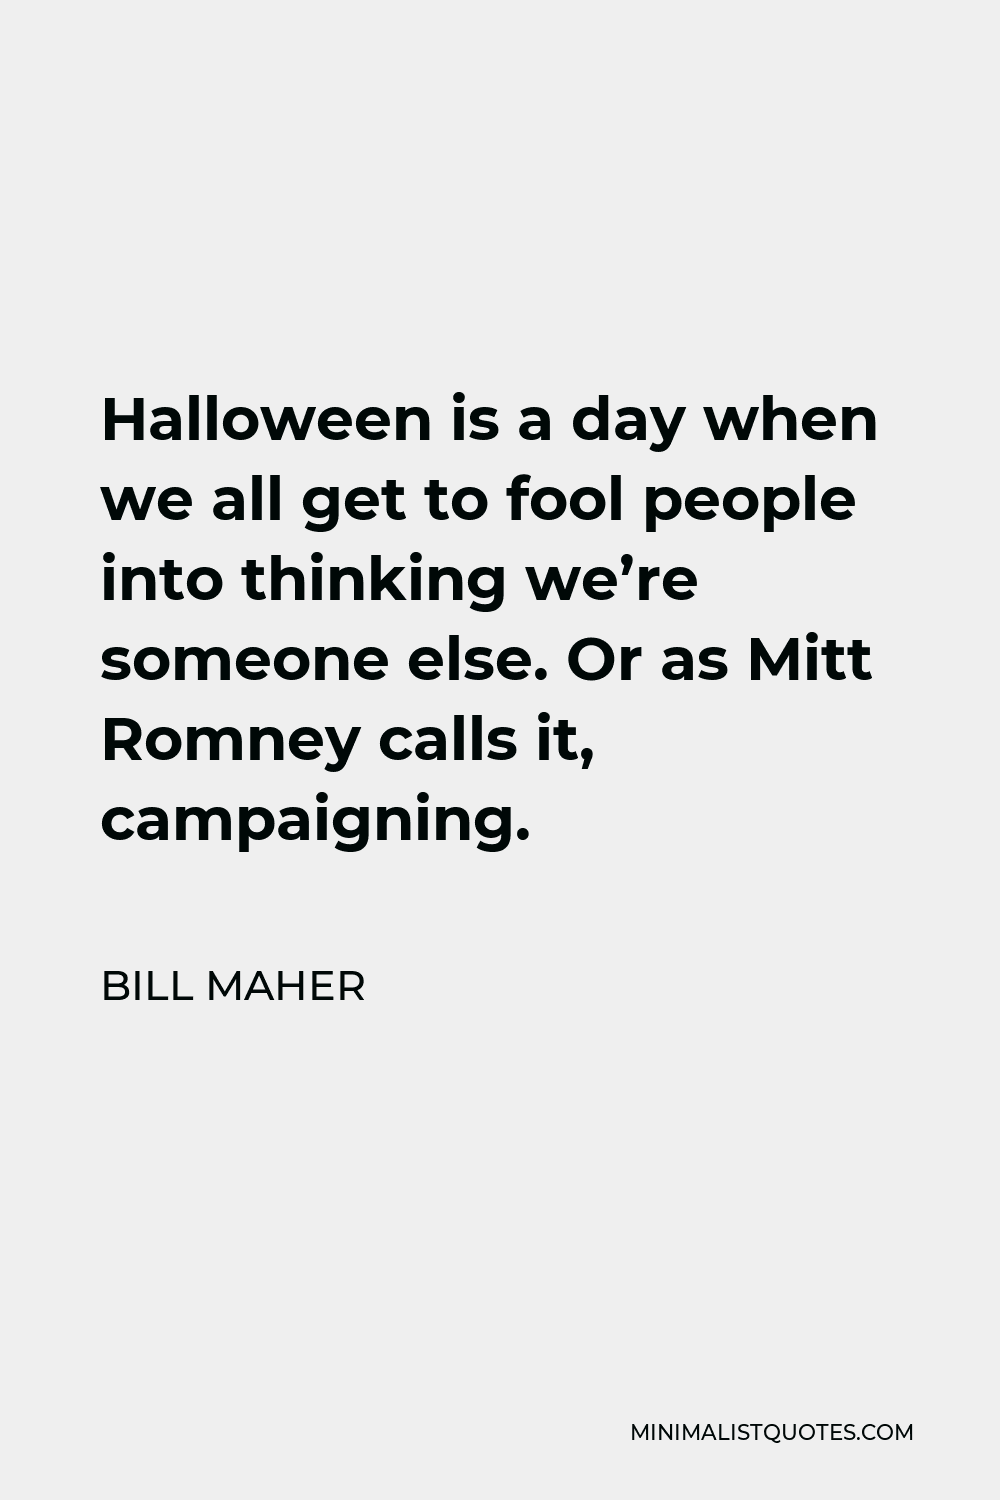 Bill Maher Quote - Halloween is a day when we all get to fool people into thinking we’re someone else. Or as Mitt Romney calls it, campaigning.